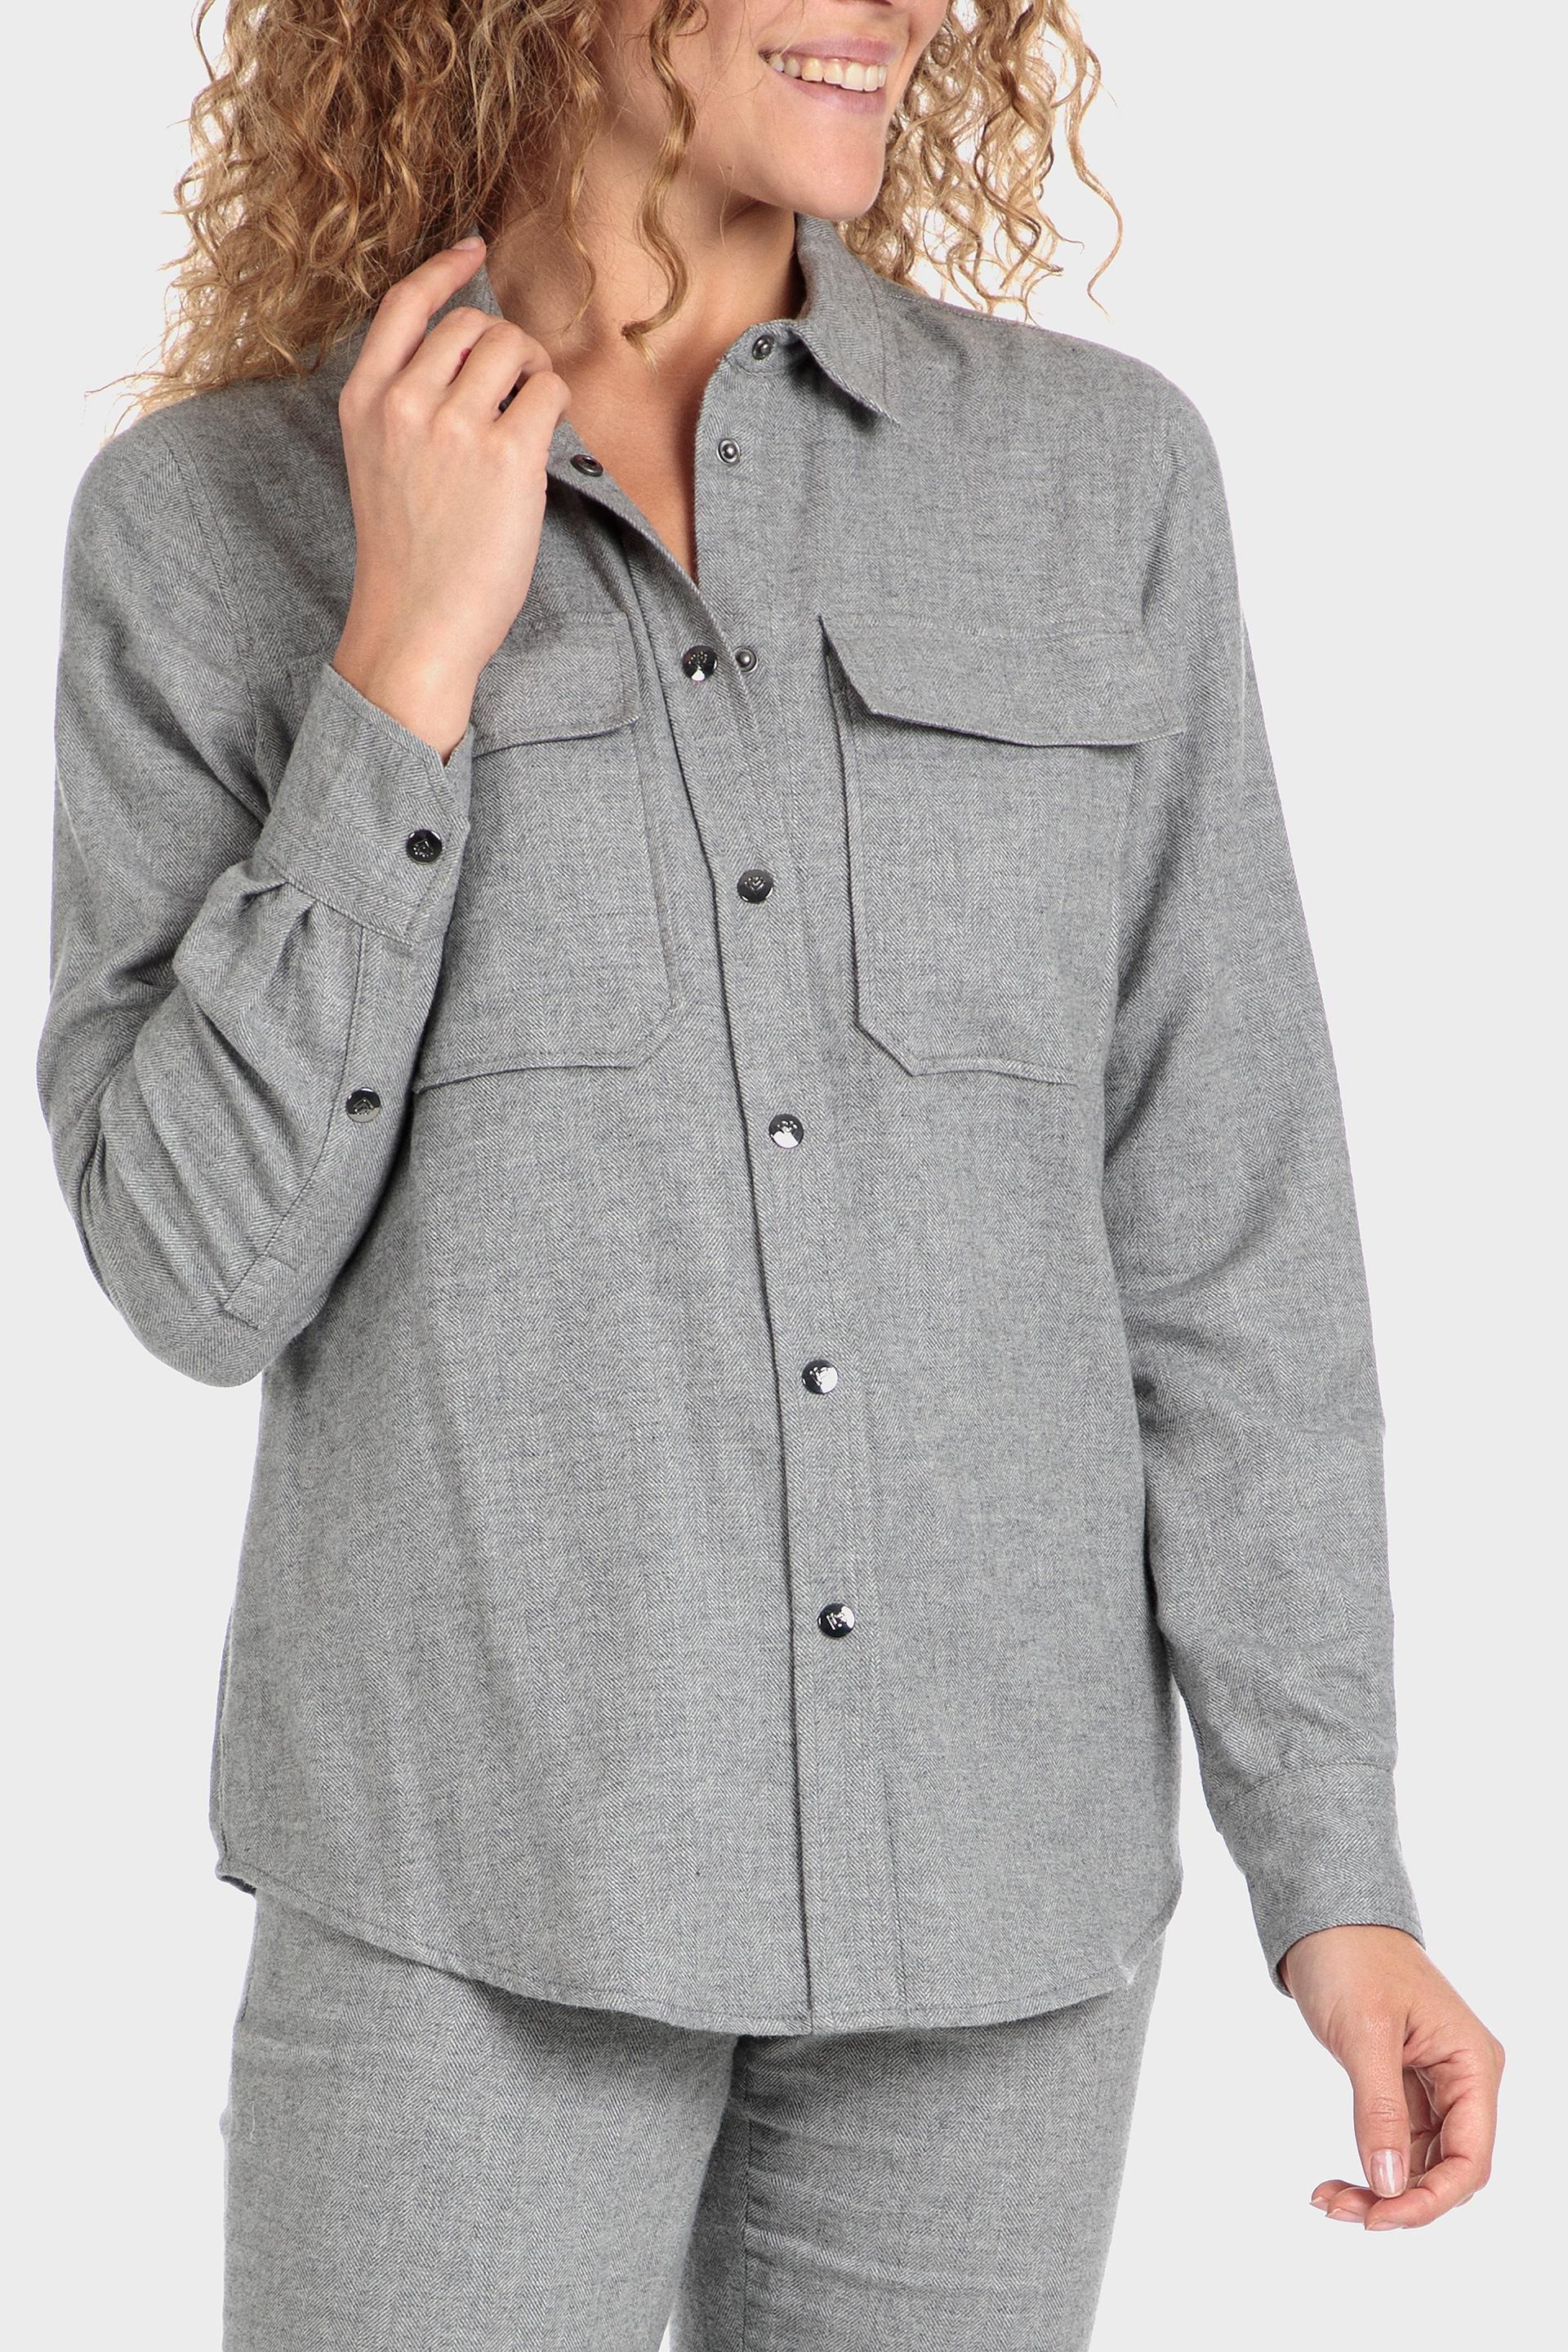 Punt Roma - Grey Buttoned Overshirt